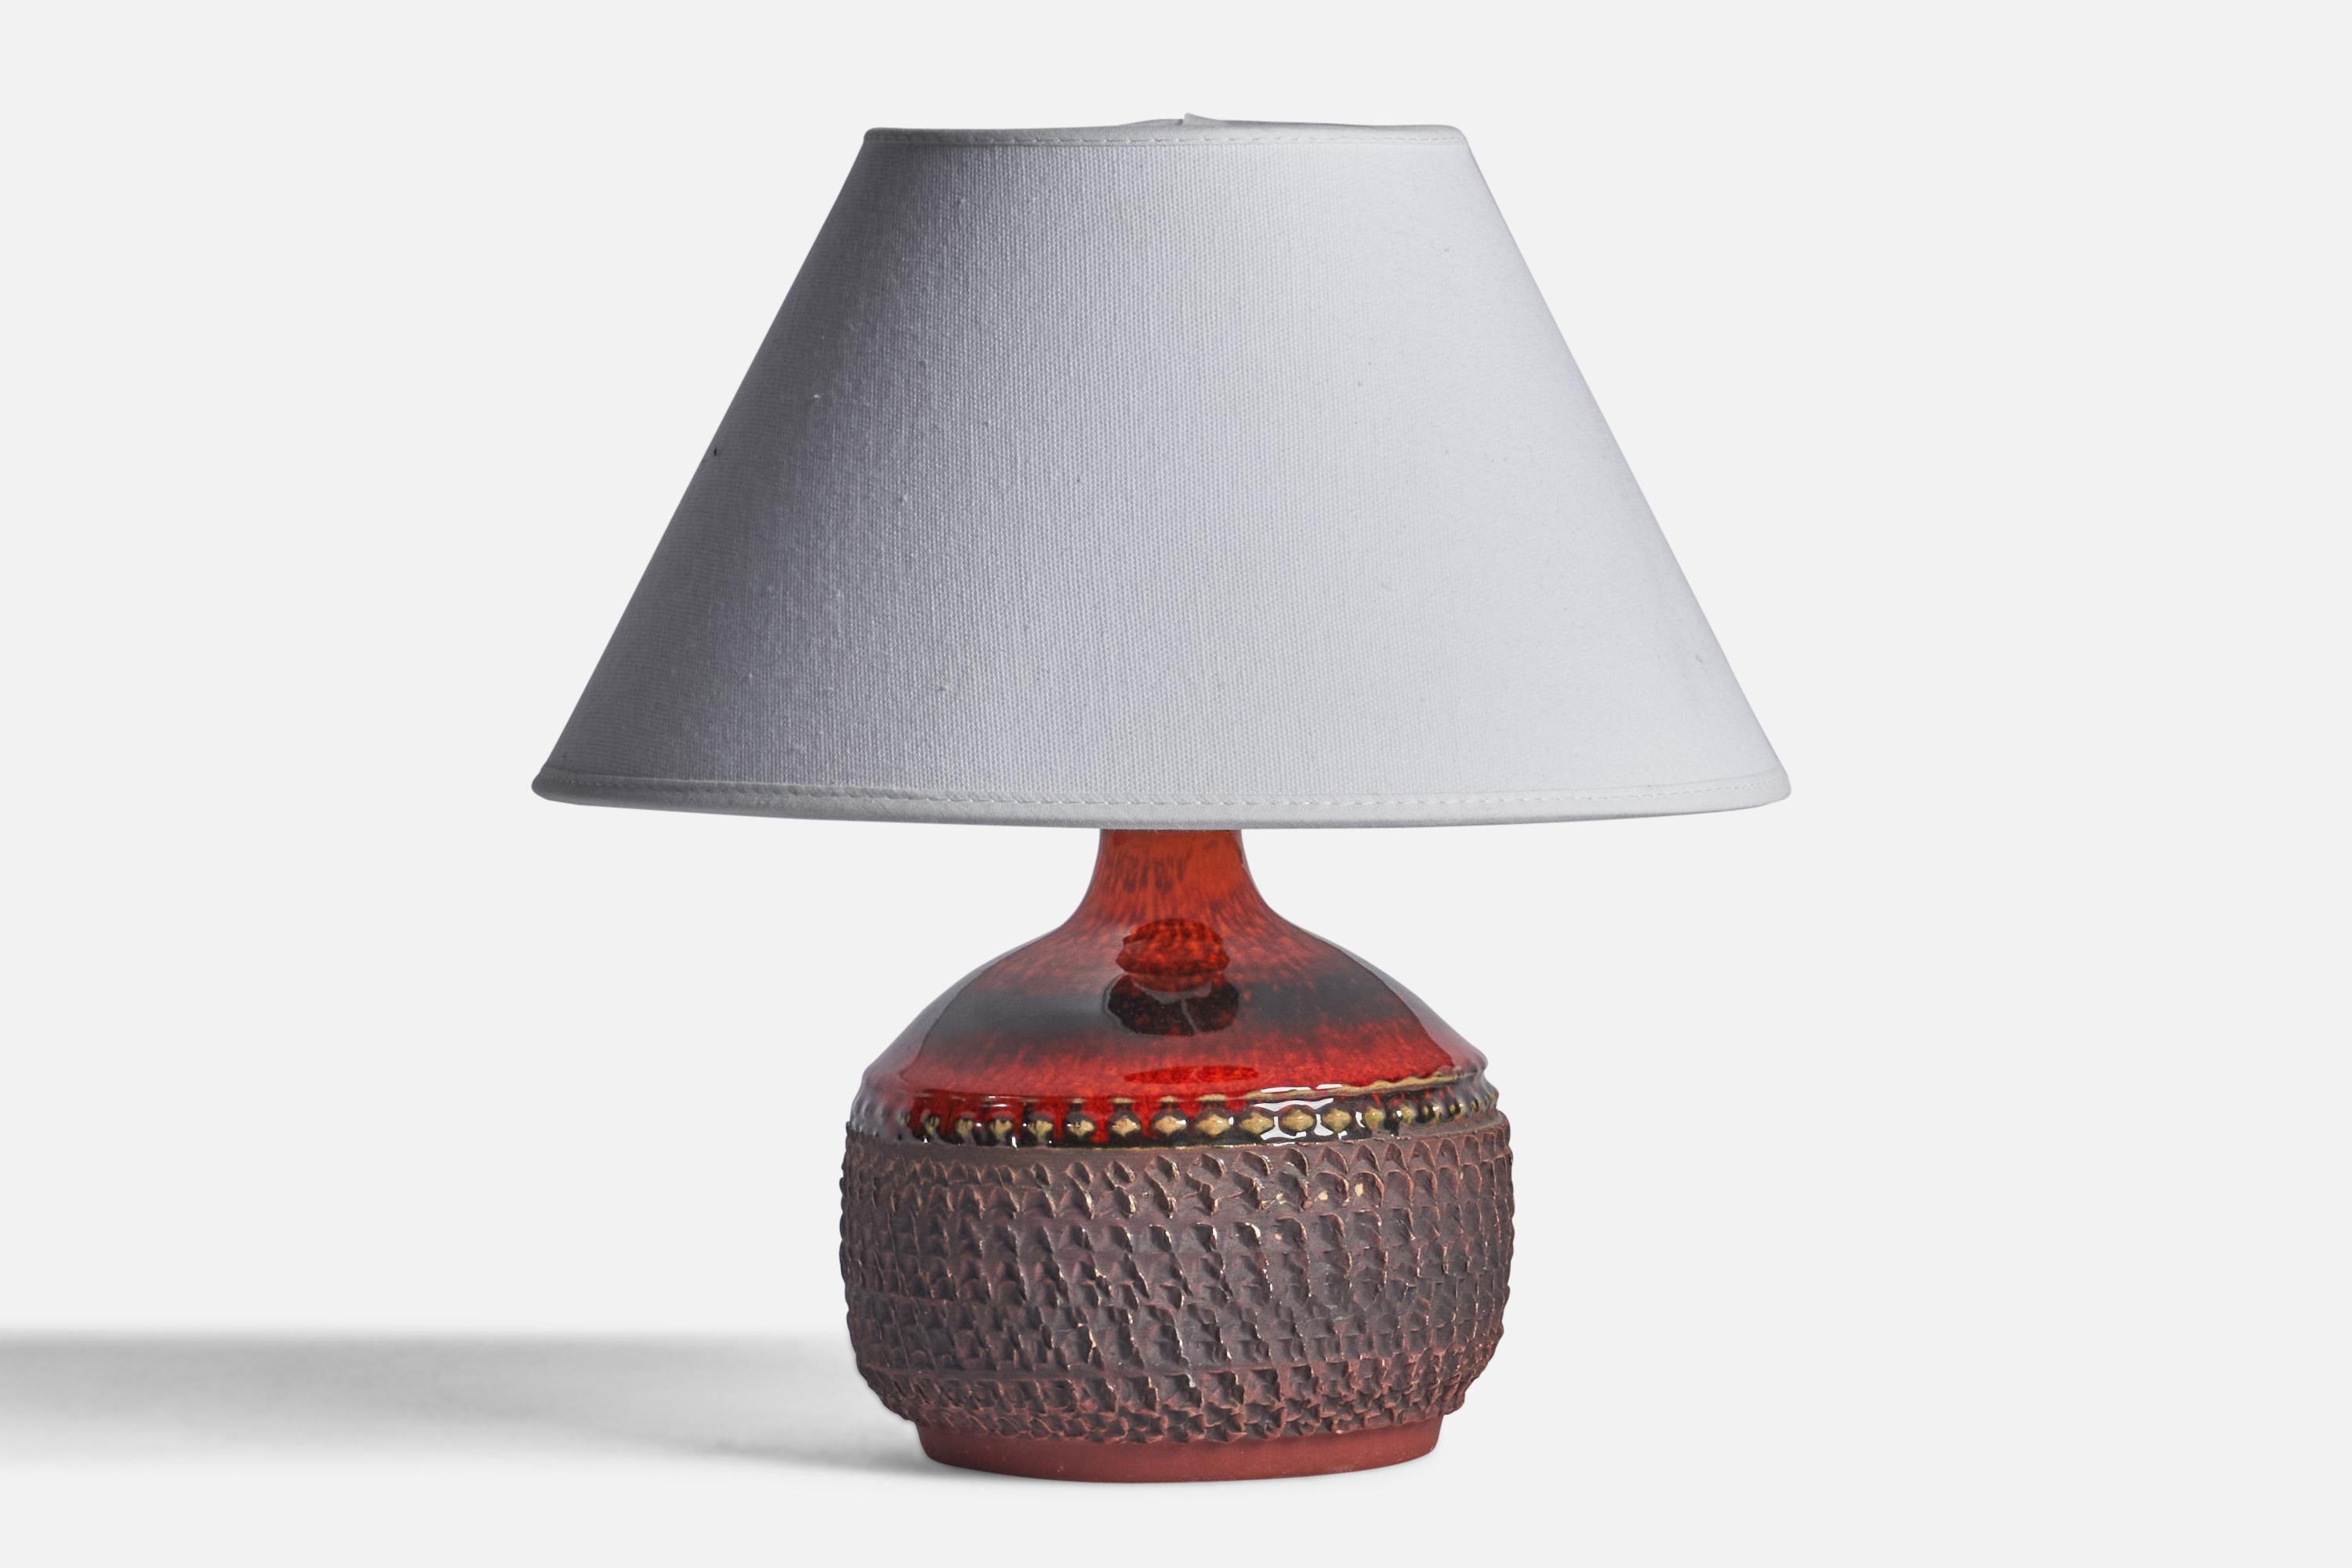 A red and brown-glazed stoneware table lamp designed and produced by Klase Höganäs, 1960s.

Dimensions of Lamp (inches): 7.5” H x 5.25” Diameter
Dimensions of Shade (inches): 4.5” Top Diameter x 10” Bottom Diameter x 5.25” H 
Dimensions of Lamp with